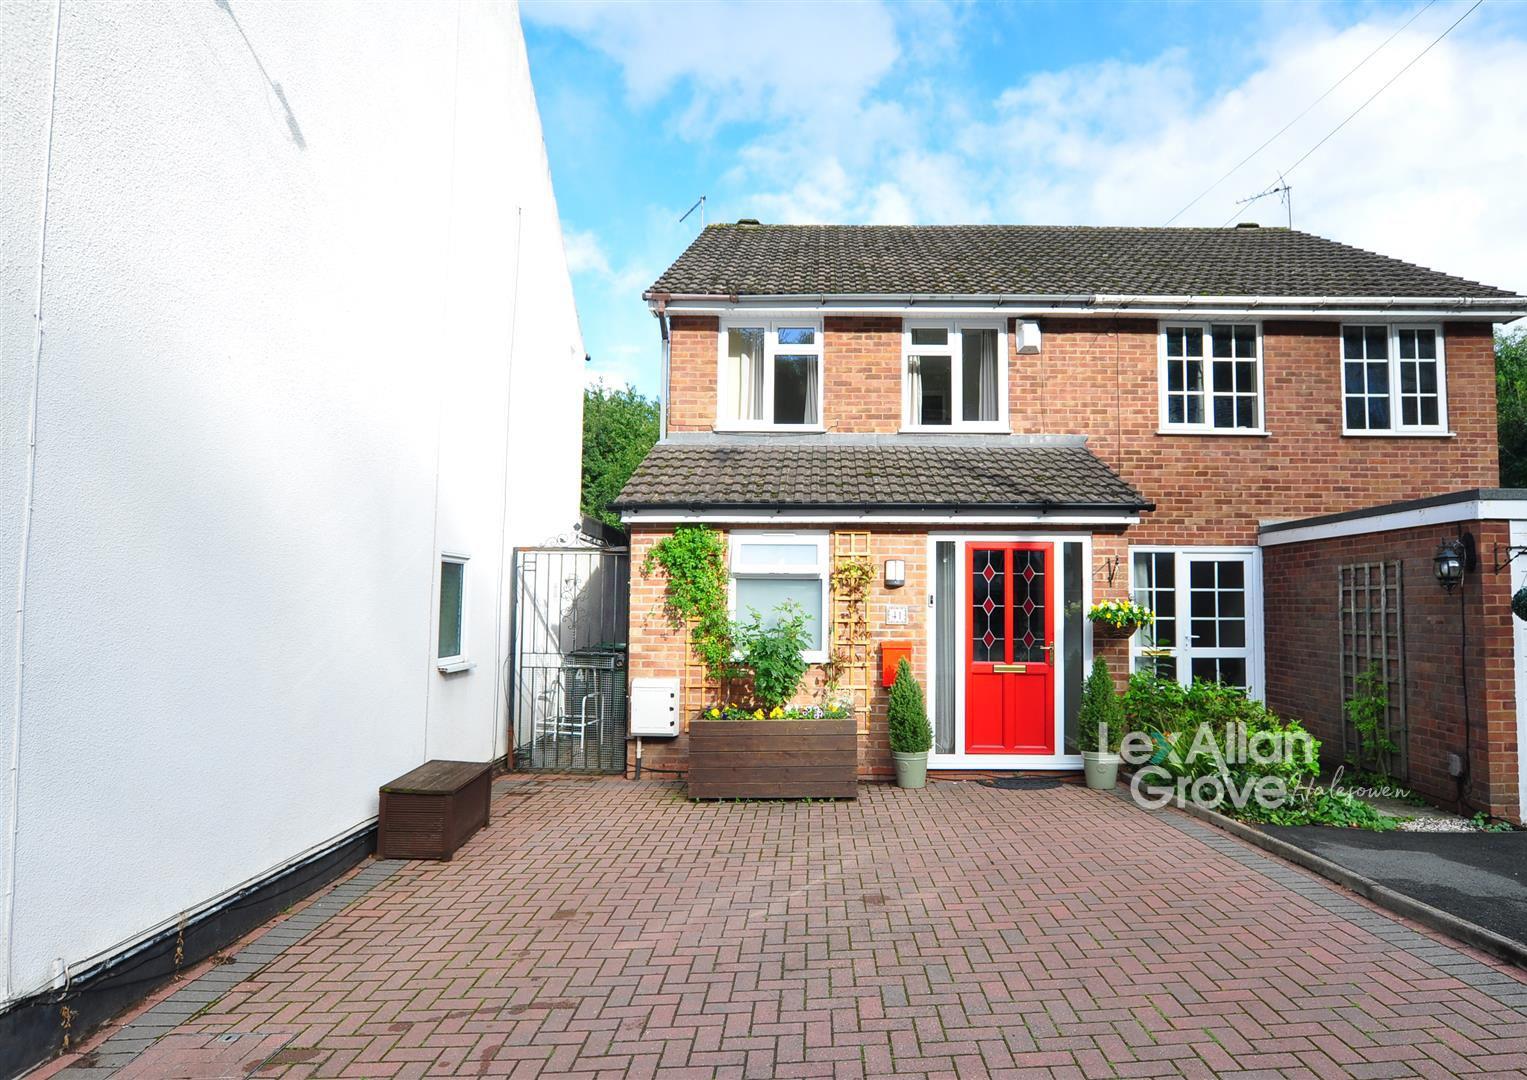 3 bed semi-detached house for sale in Furnace Hill, Halesowen - Property Image 1